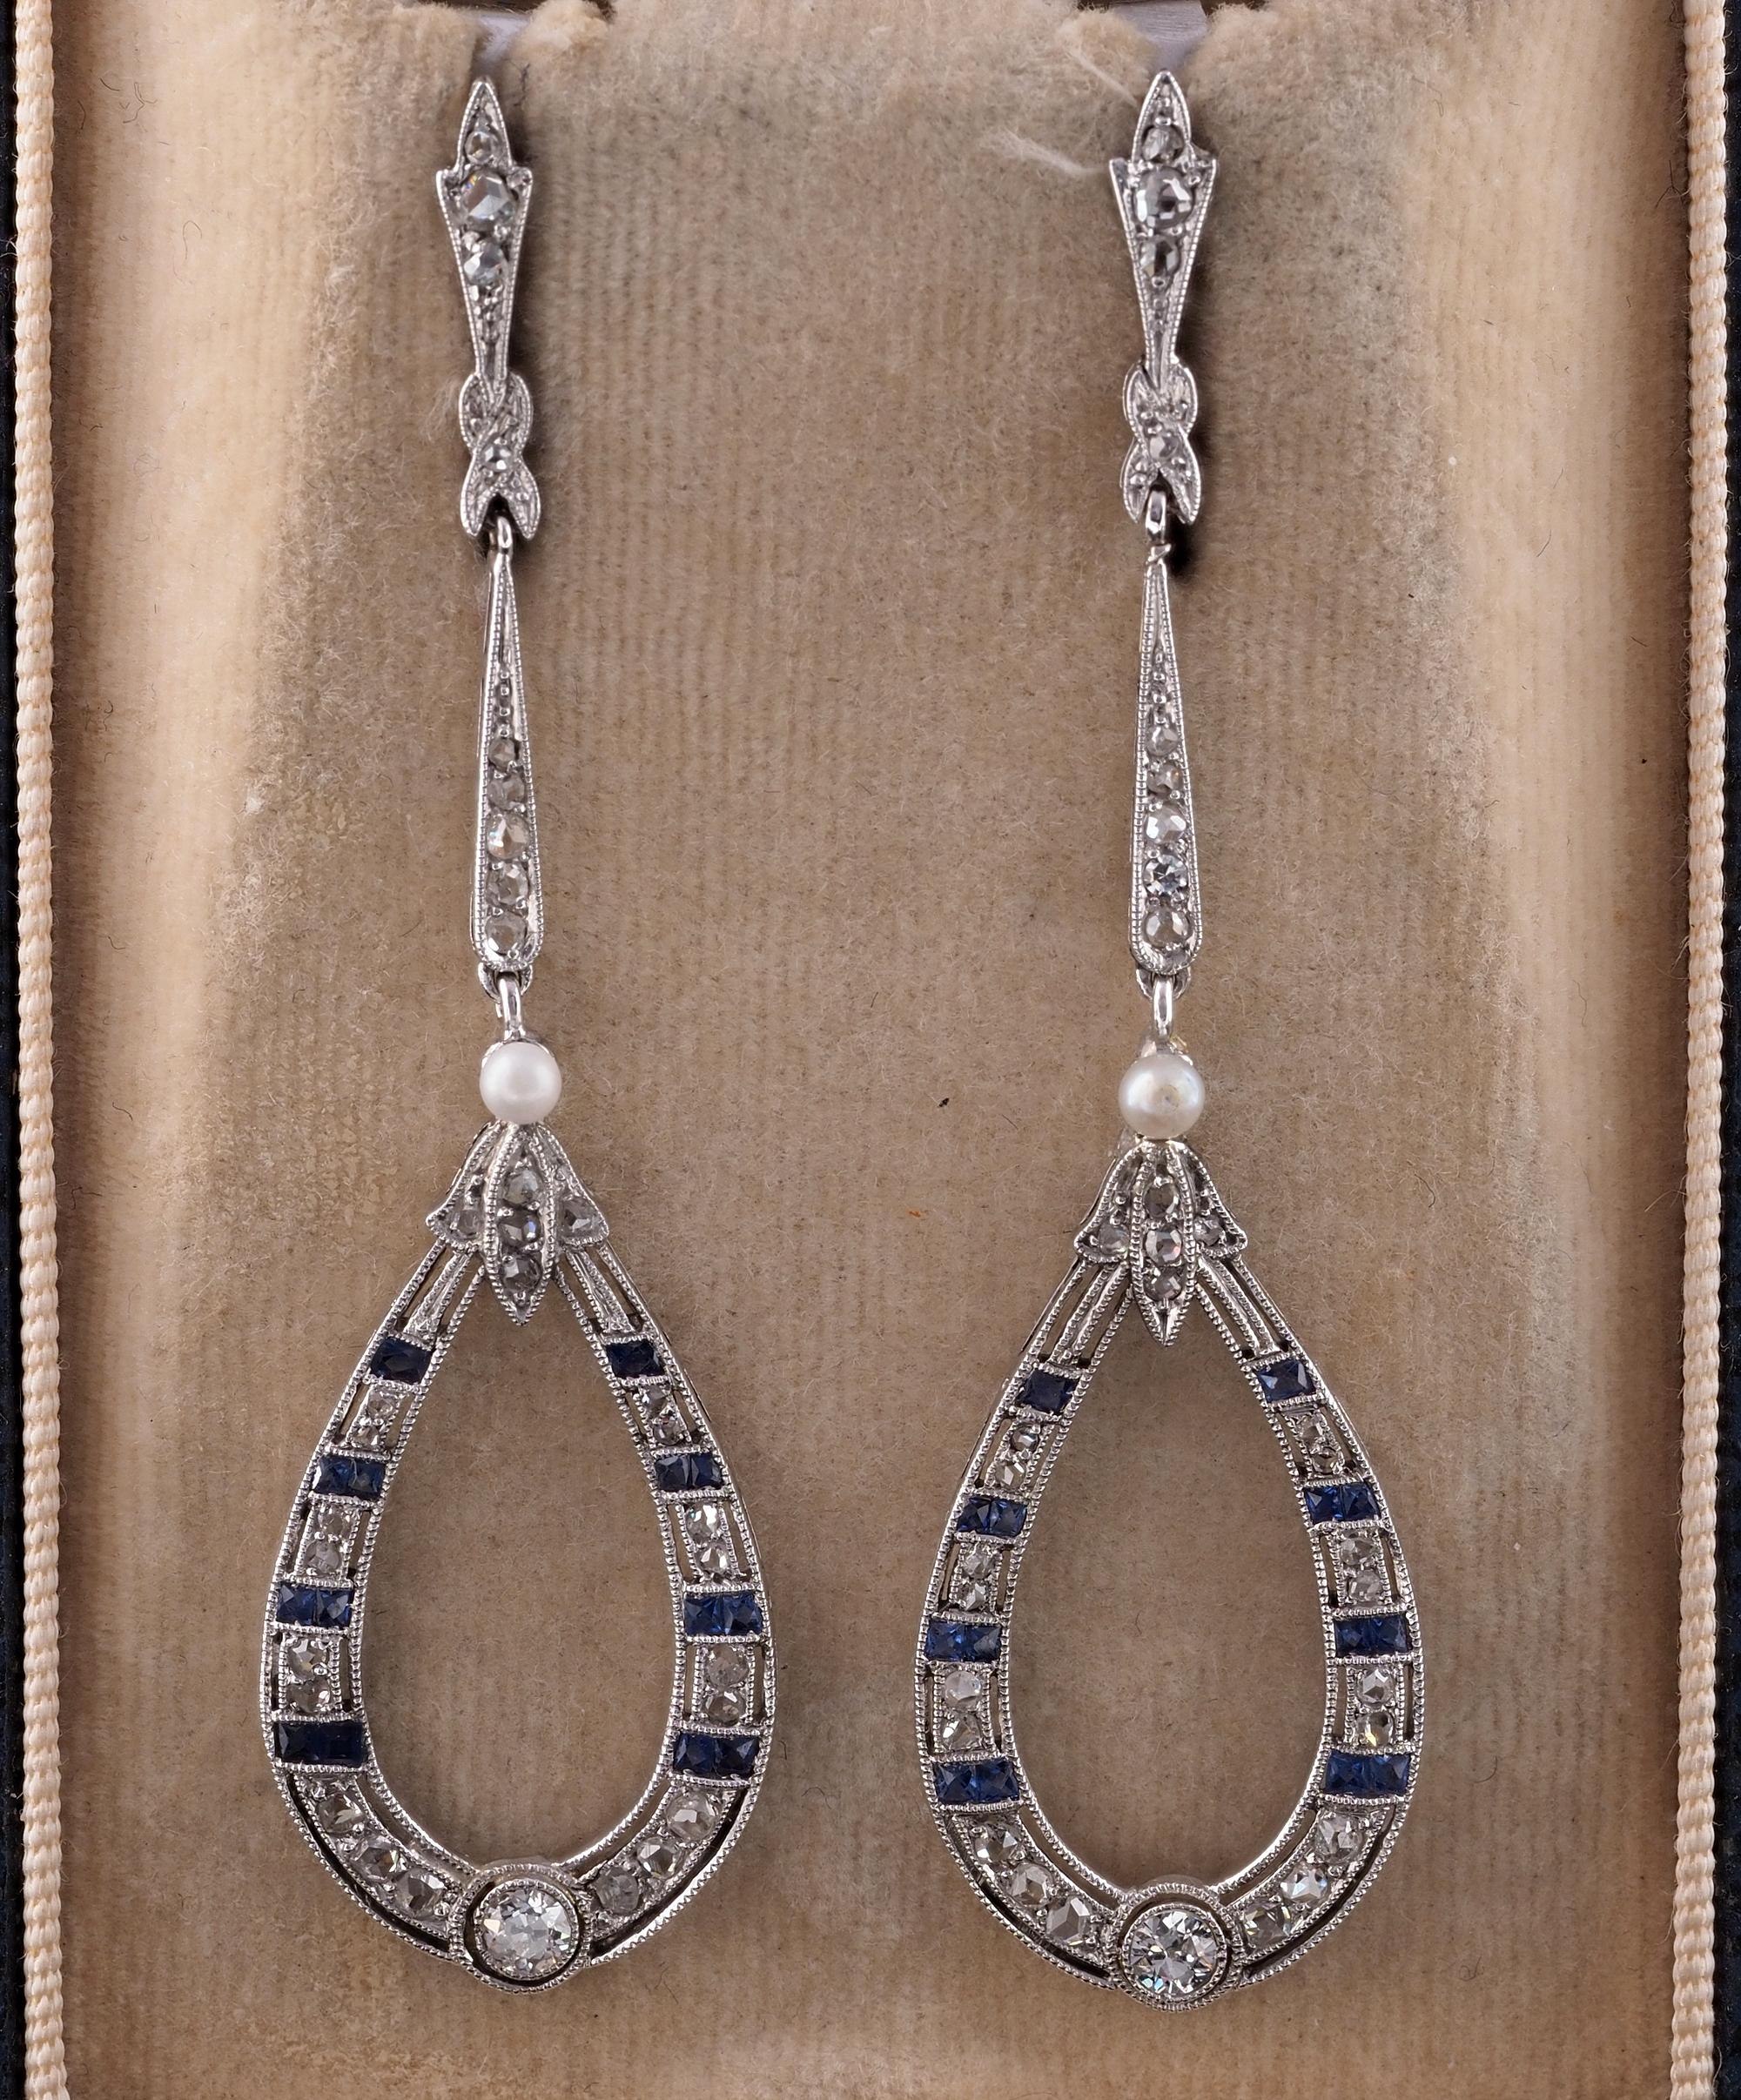 Without Time
Stunning articulated long drop earrings from the Edwardian period, 1905 ca
Hand fabricated in Platinum, elegantly elongated, airy and sleek shape, finely worked with detailed millgrain enhancing the delicacy of Diamond and Sapphire
Set